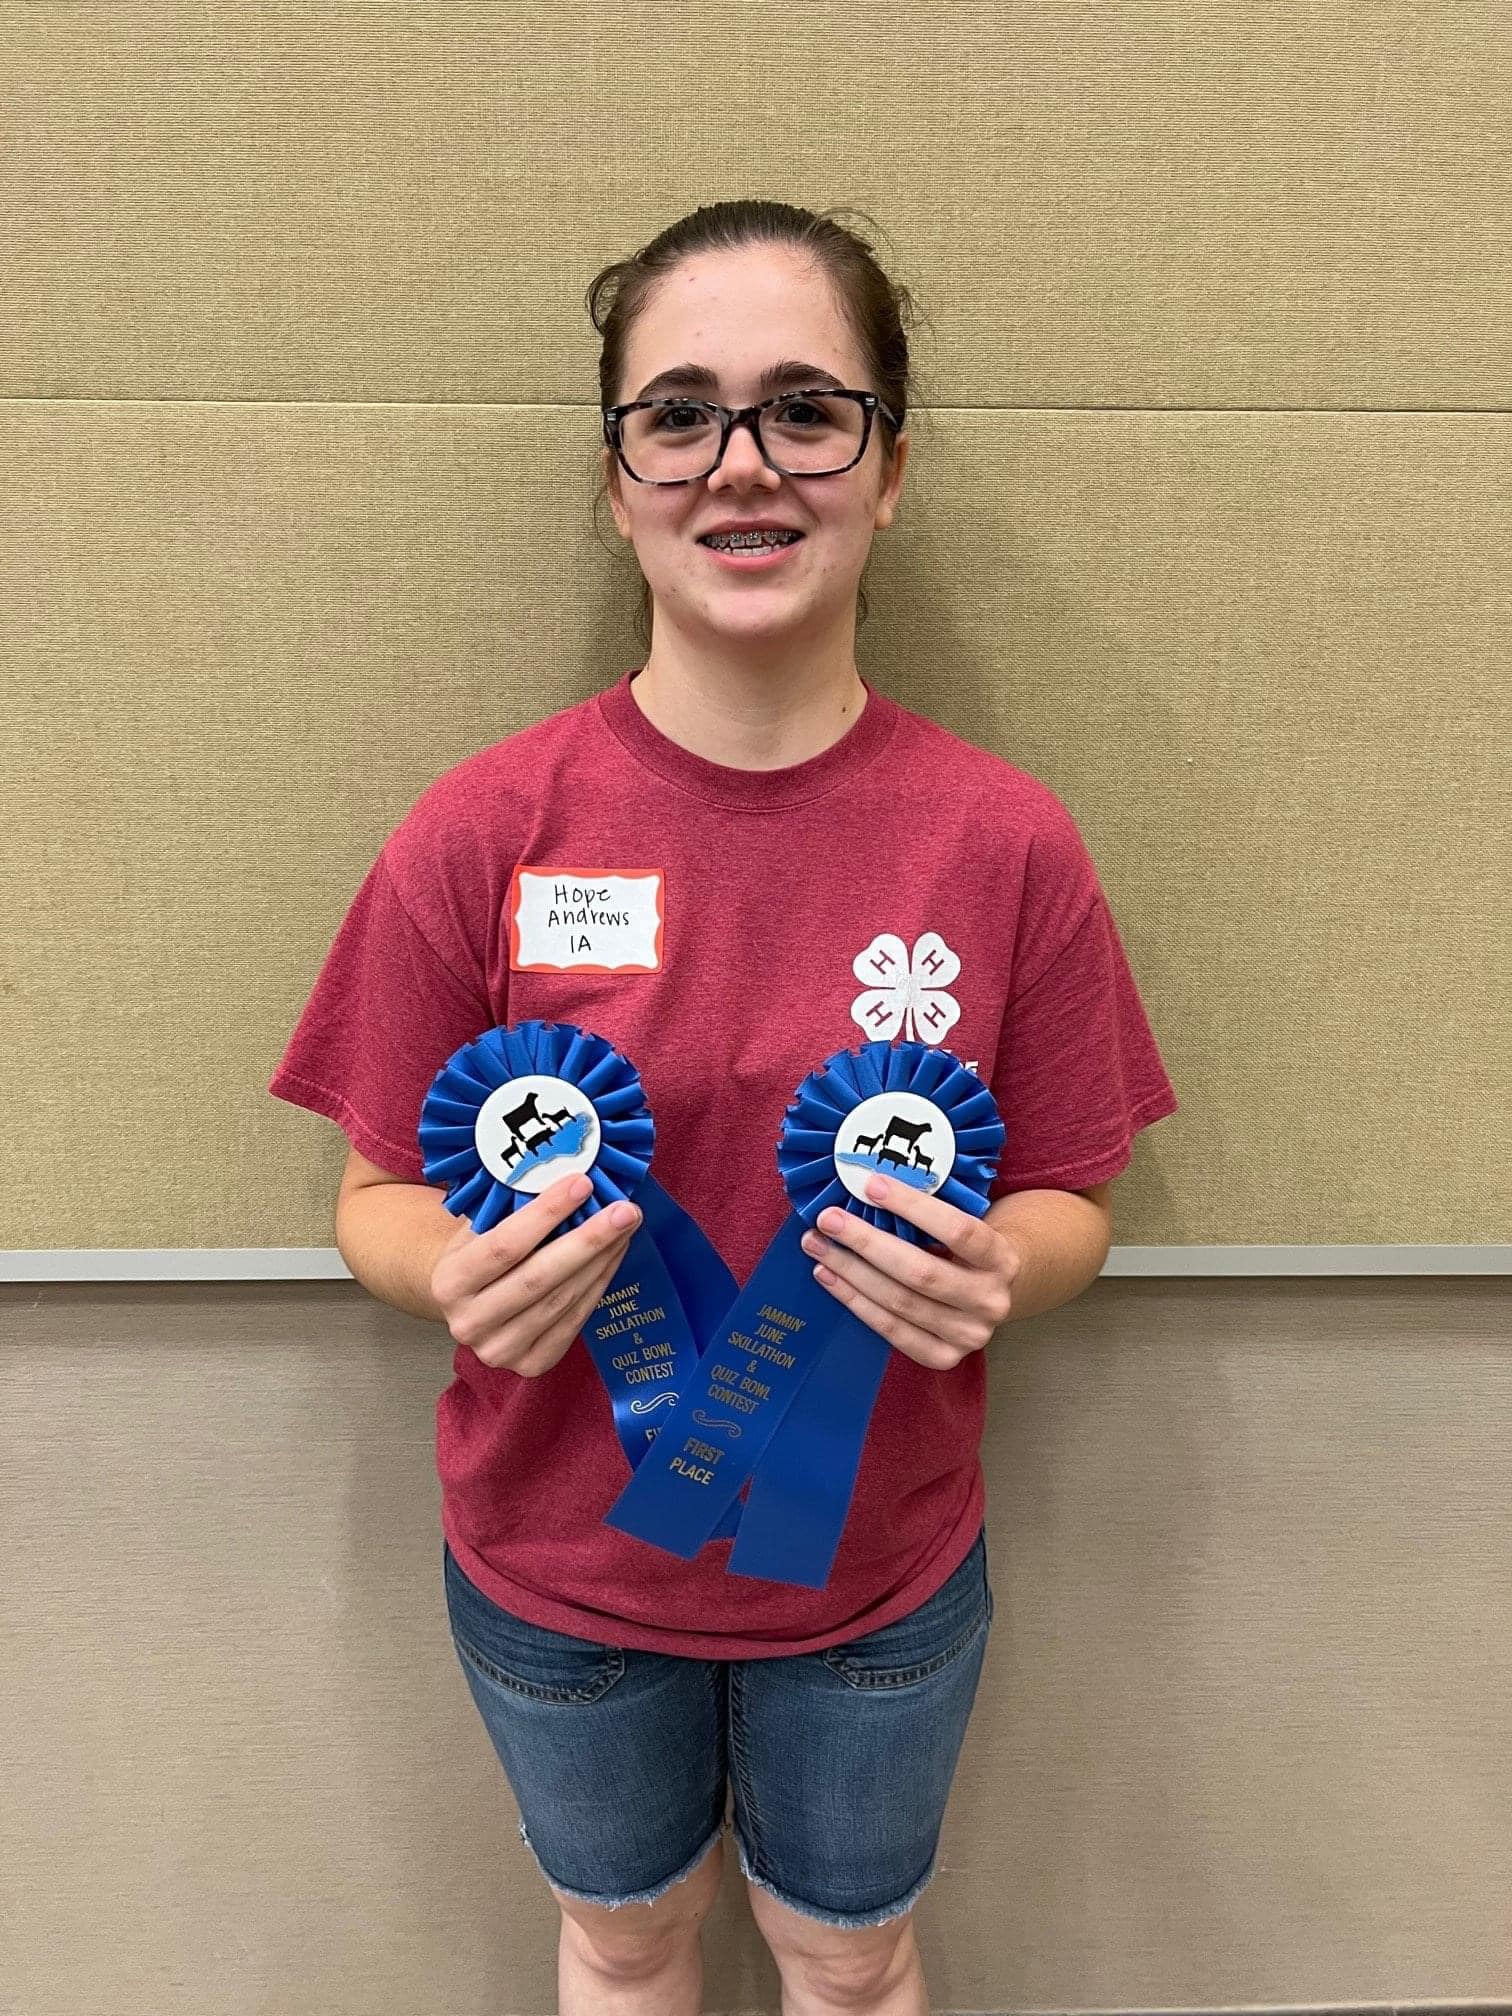 Hope Andrews won 1st overall for Skillathon and was a member on the 1st place Quizbowl team.